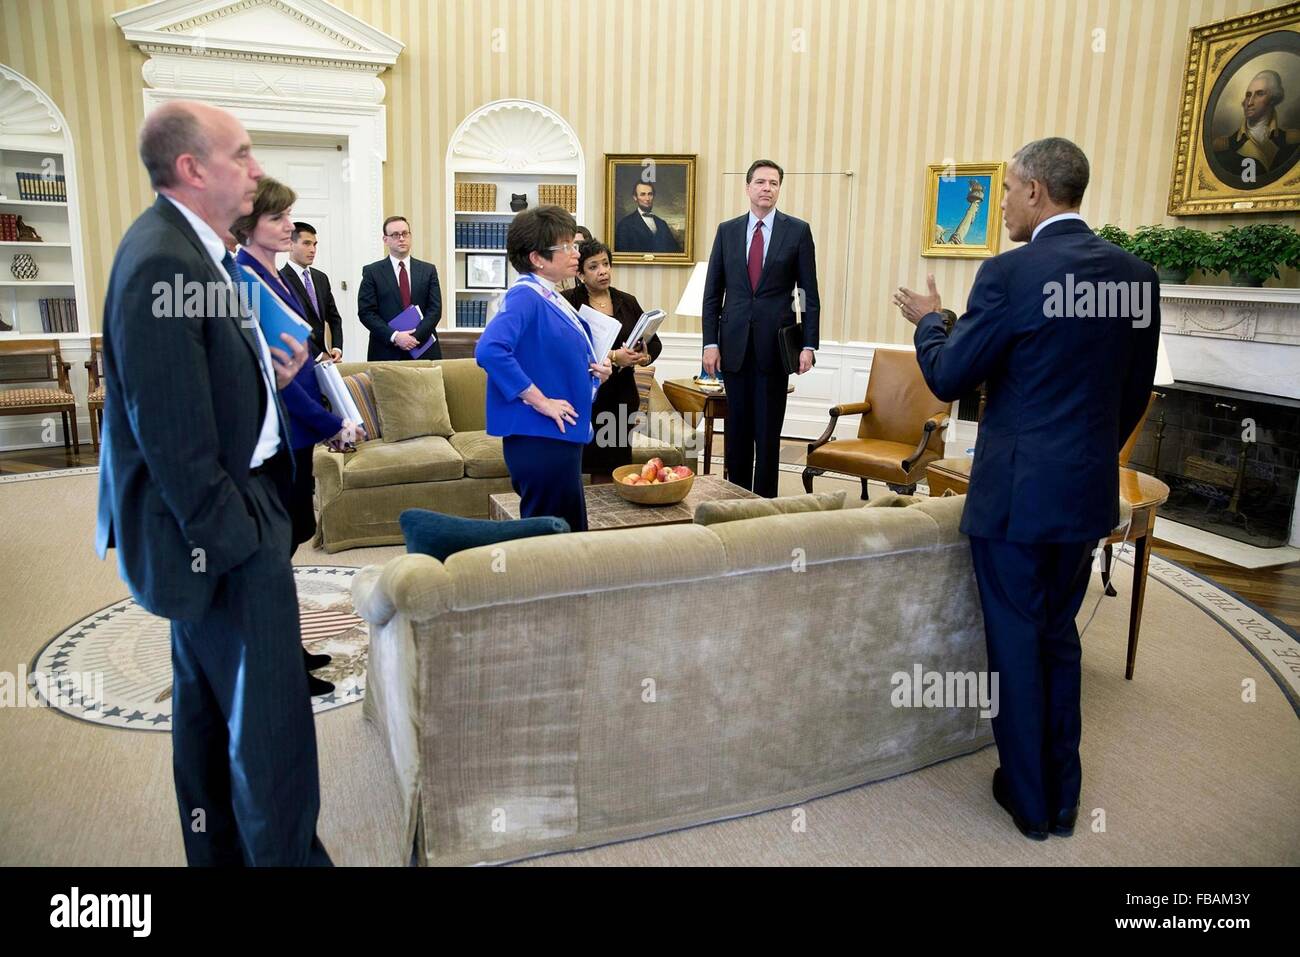 U.S President Barack Obama speaks with the attendees following a meeting on the executive actions he can take to curb gun violence in the Oval Office of the White House January 4, 2016 in Washington, DC. Listening to the President, from left: Neil Eggleston, Counsel to the President; Deputy Attorney General Sally Yates; Eric Nguyen, Associate Counsel to the President; Michael Bosworth, Deputy Counsel to the President; Senior Advisor Valerie Jarrett; Attorney General Loretta Lynch; Natalie Quillian, Deputy Assistant to the President and FBI Director James Comey. Stock Photo